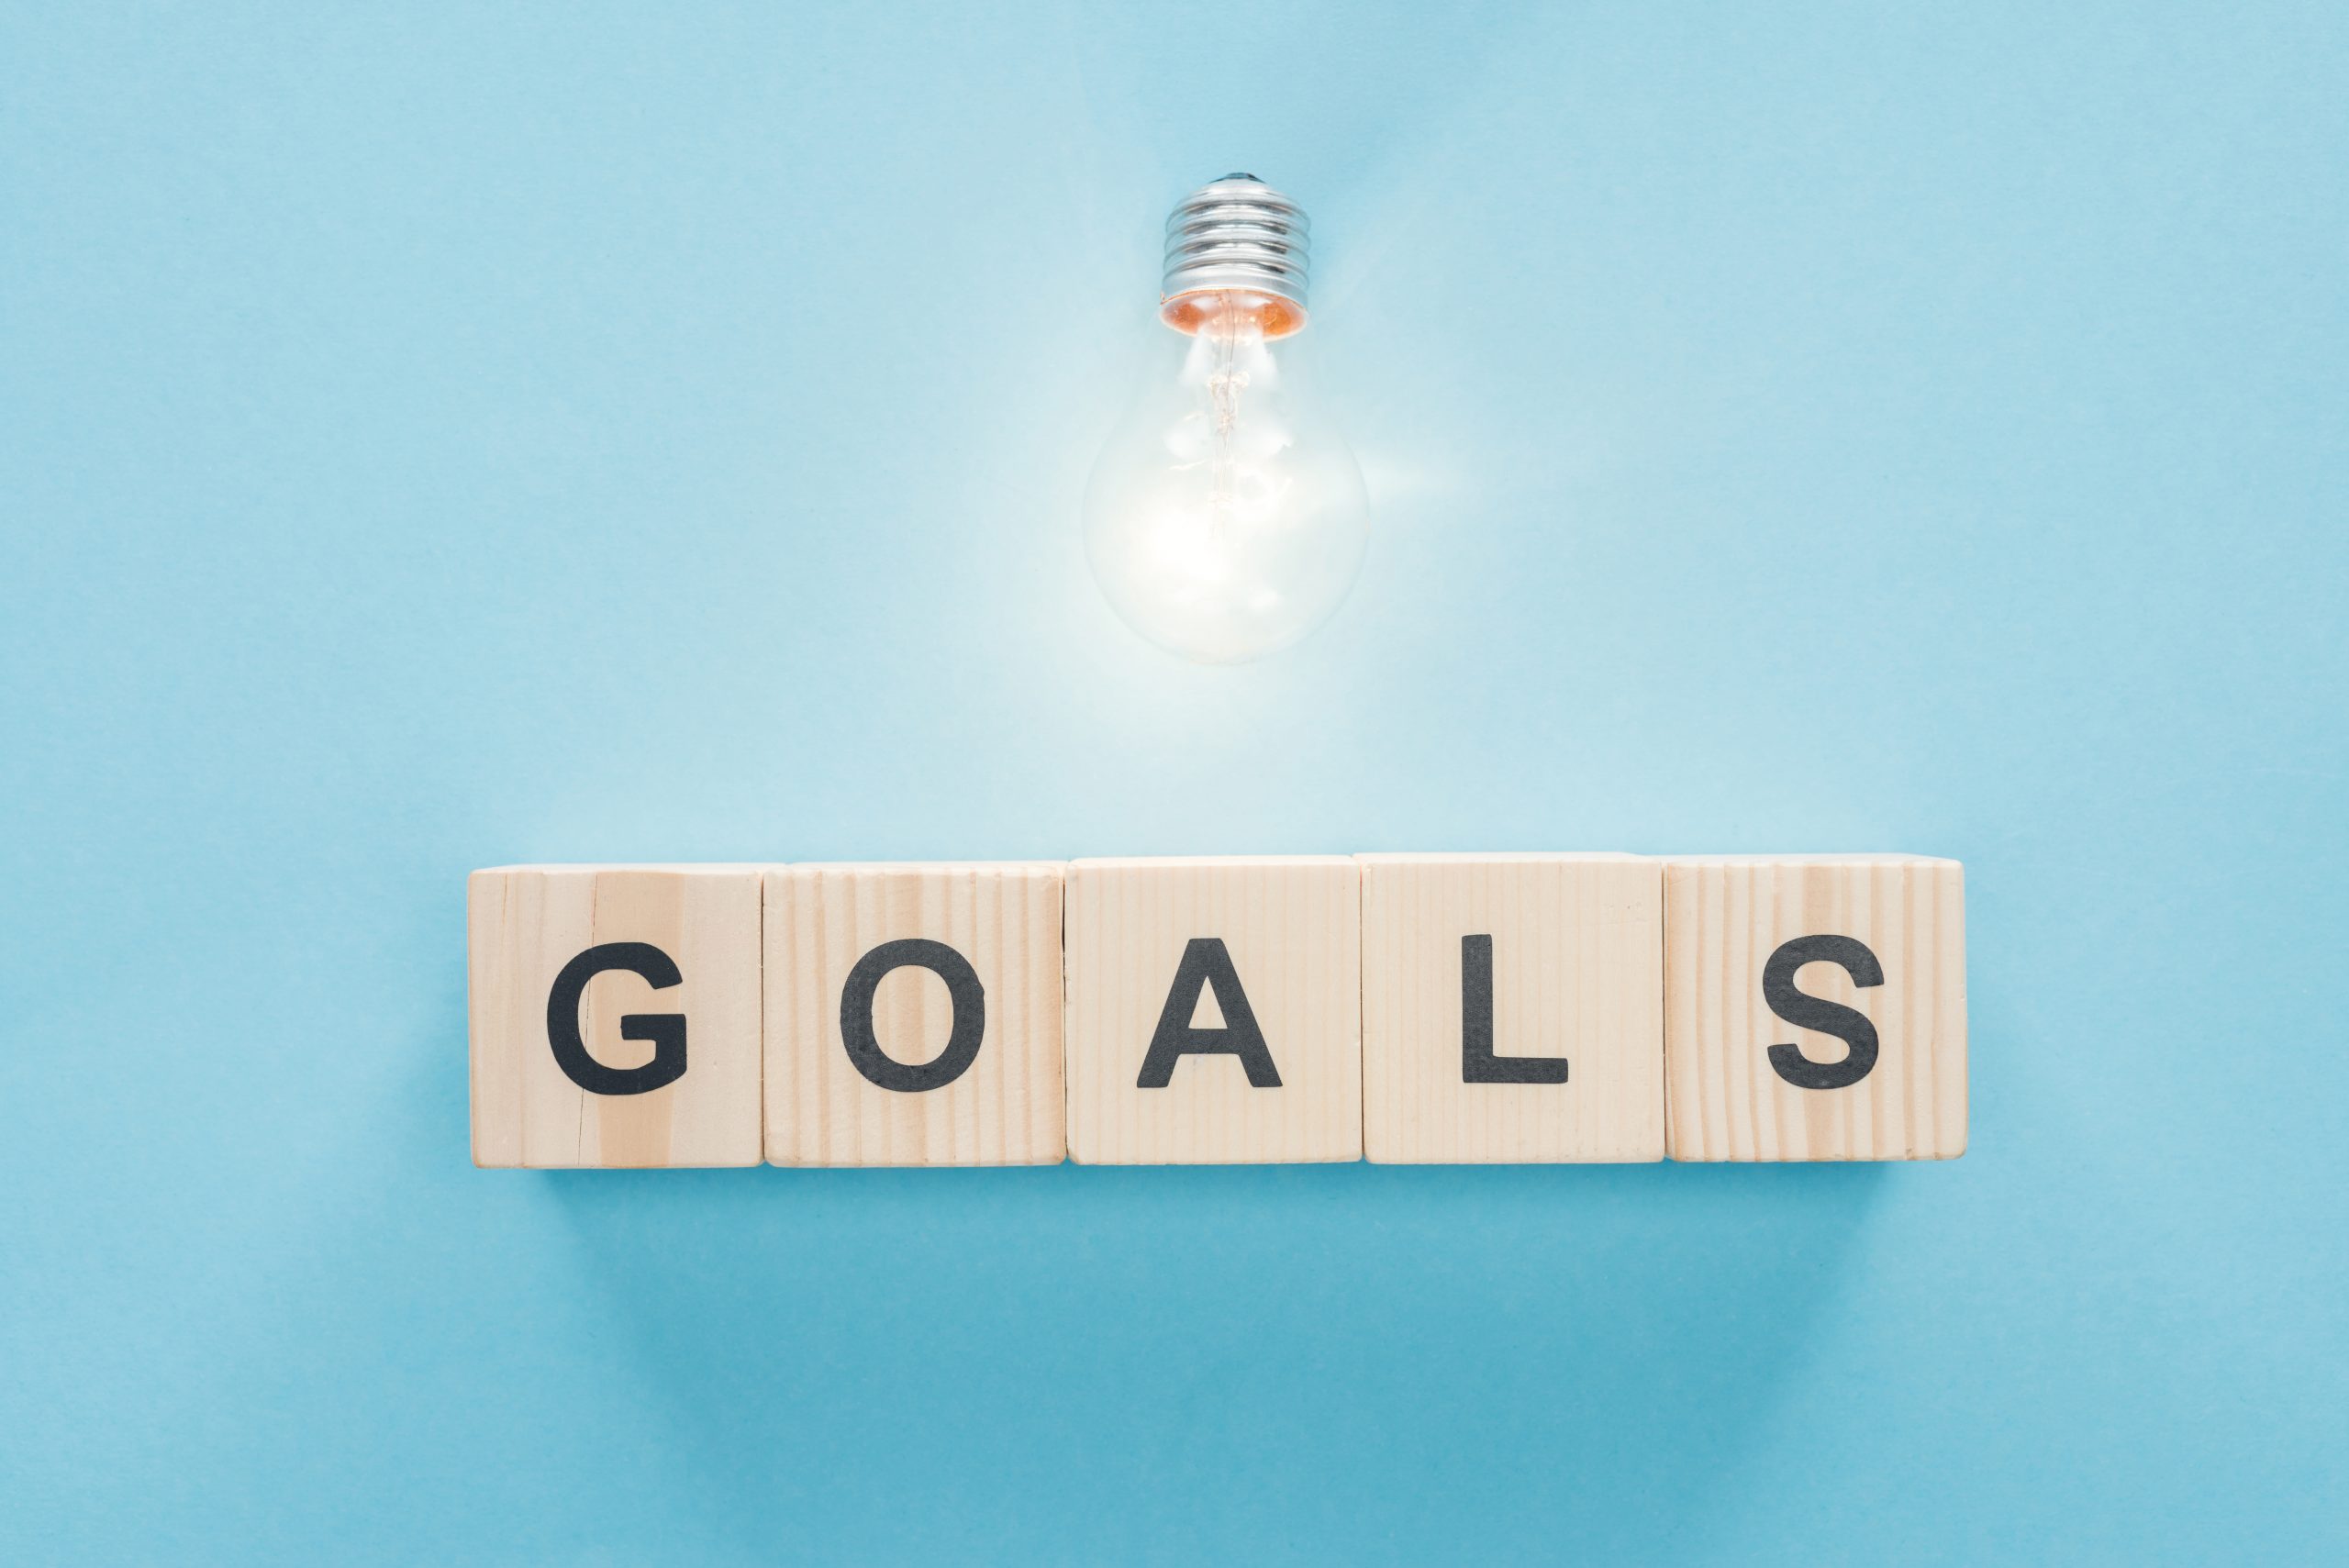 Glowing lightbulb above the word "goals" spelled out in wooden blocks against a light blue background.